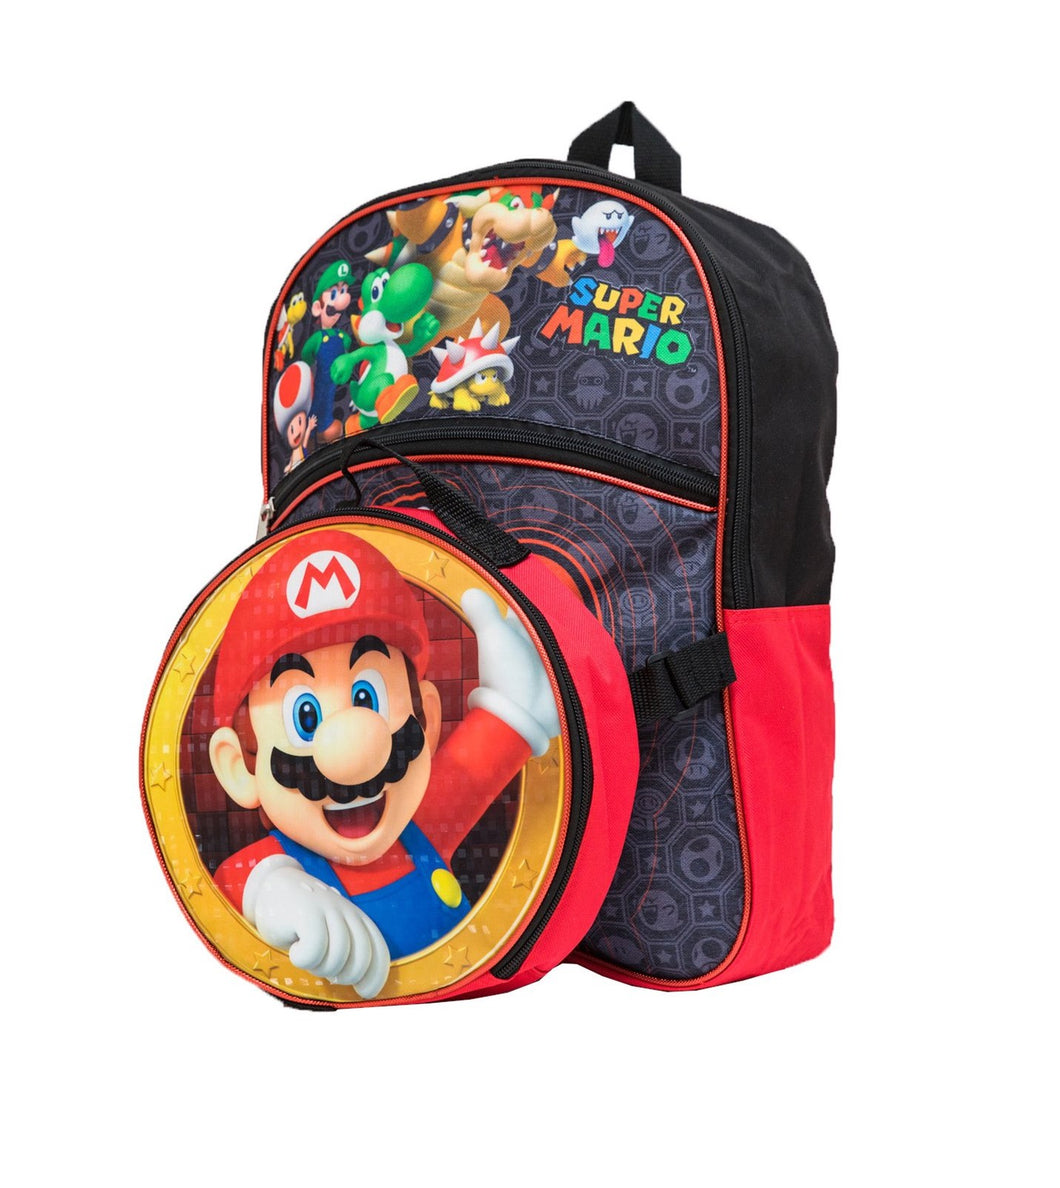 Super Mario Backpack Large 16 inch and Circle Lunch Bag Set